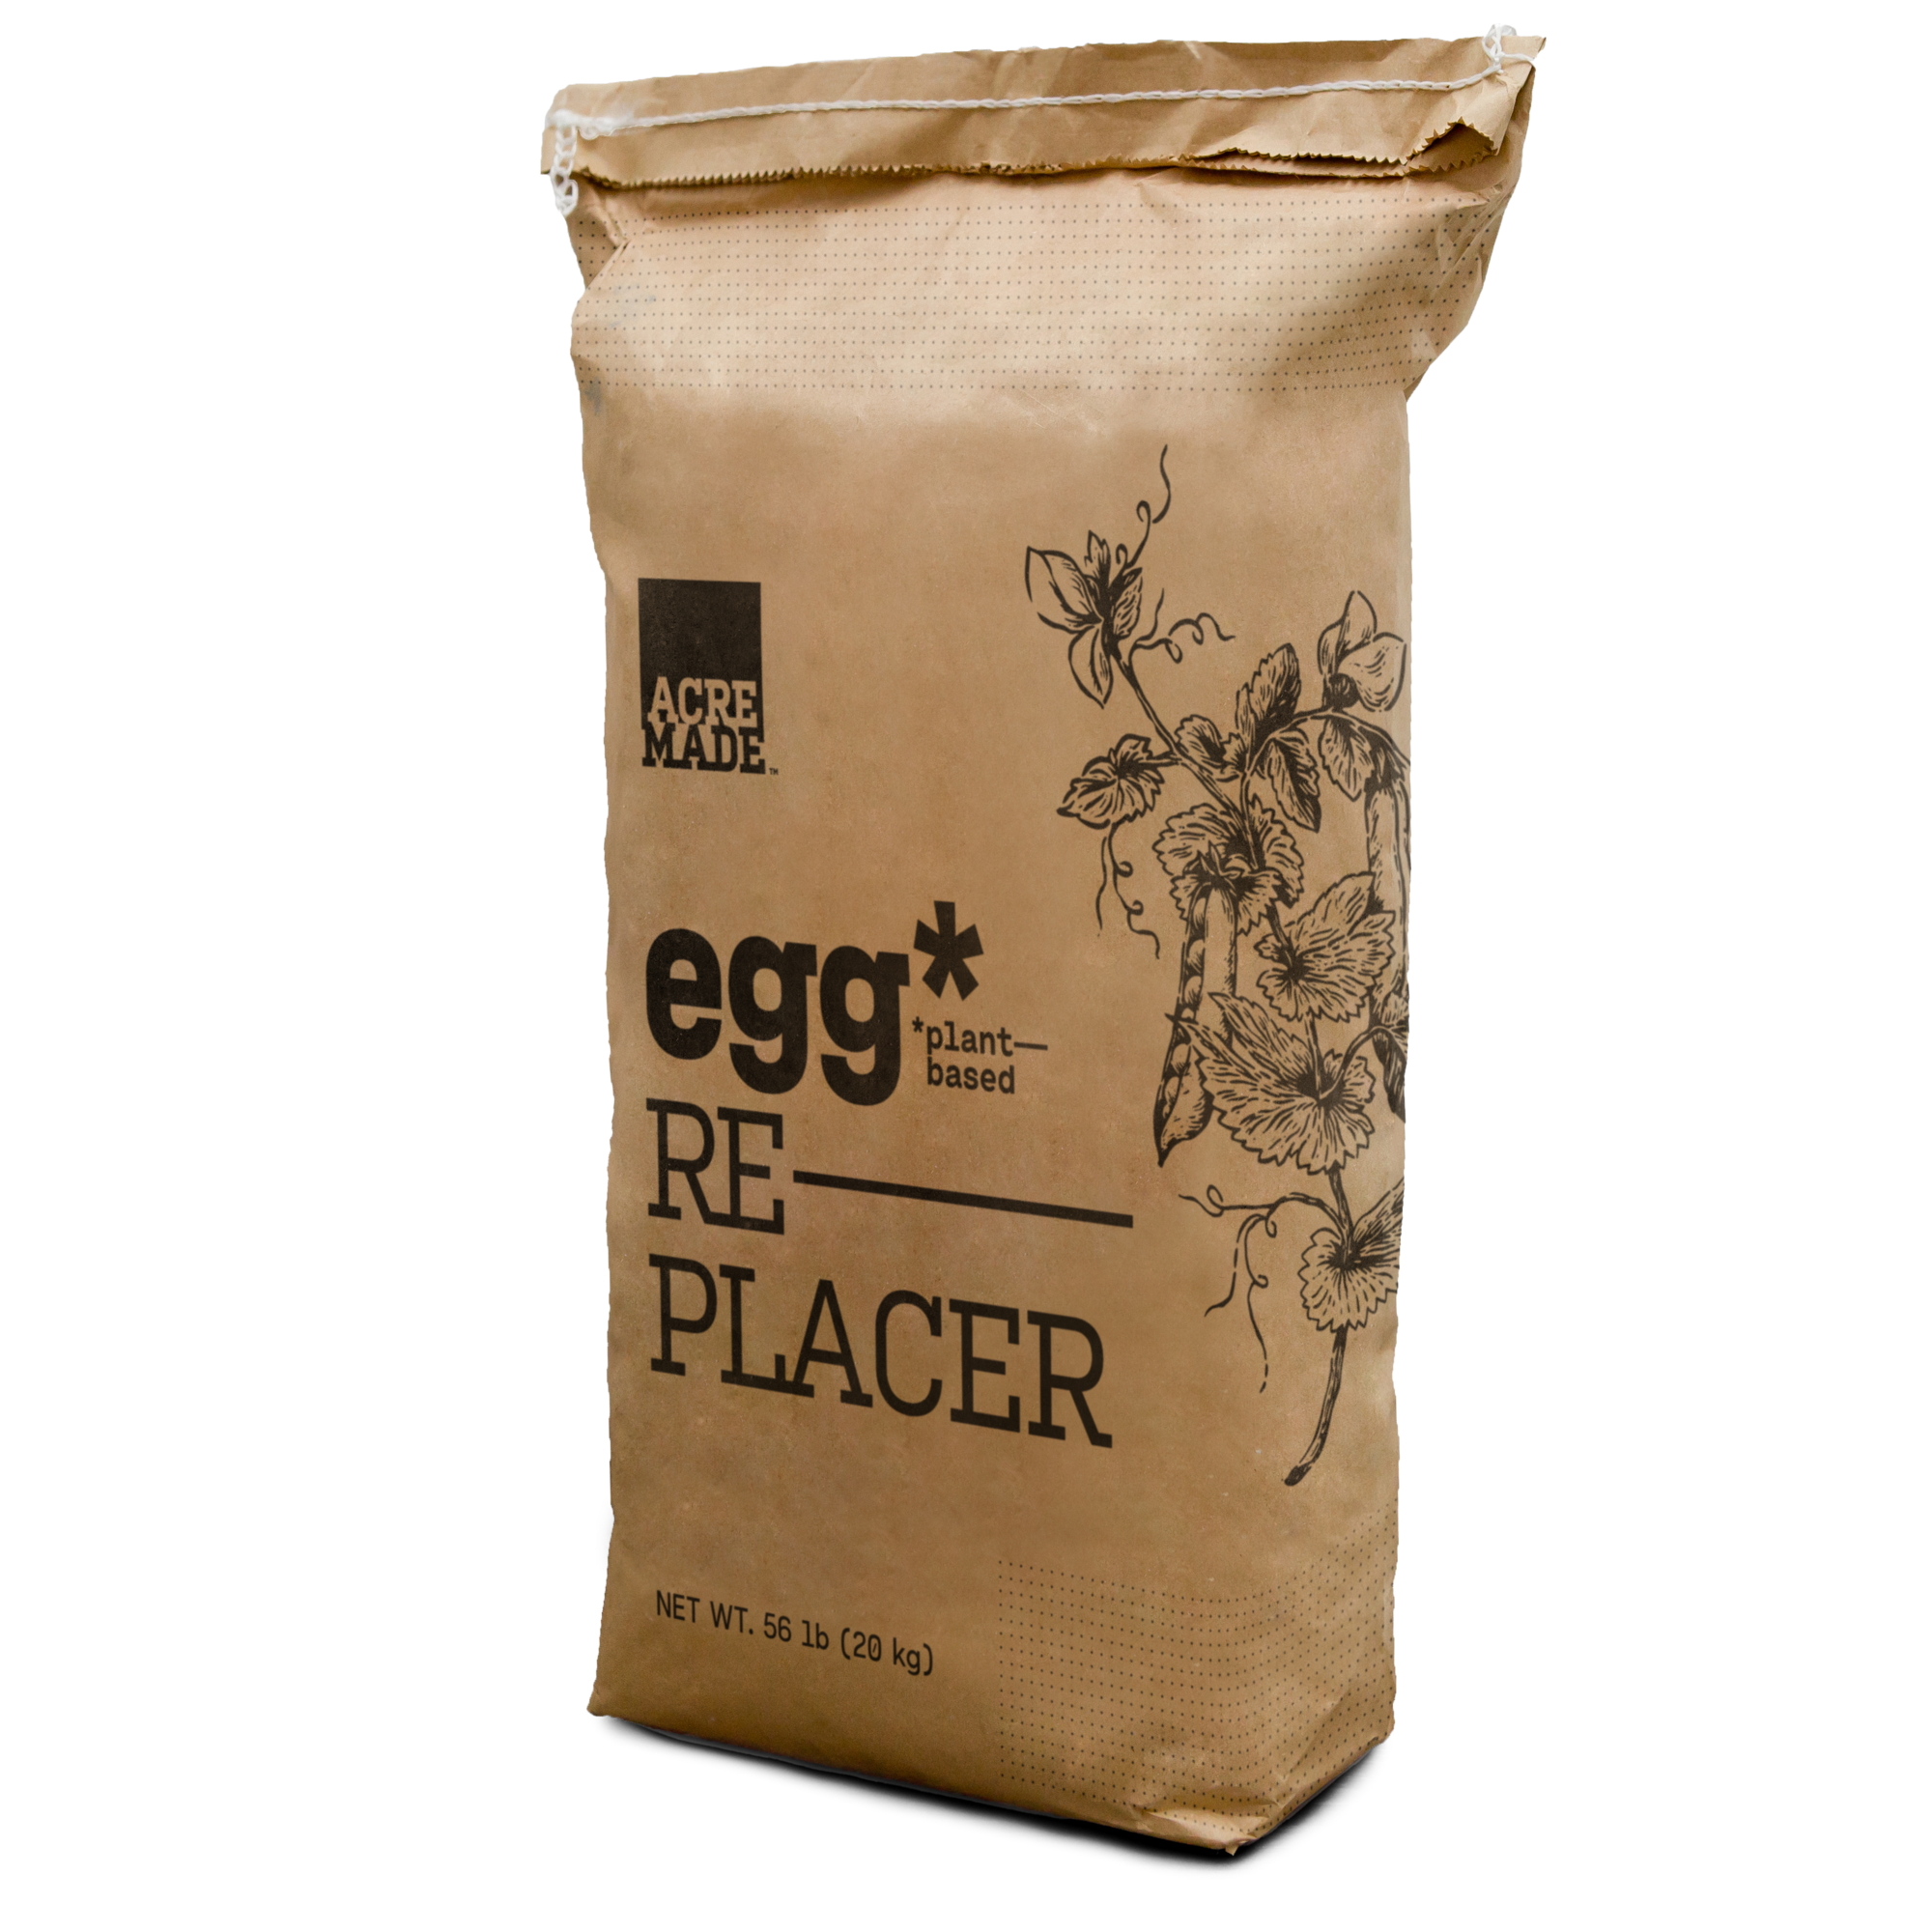 Acremade Plant-Based Egg Replacer for Baking